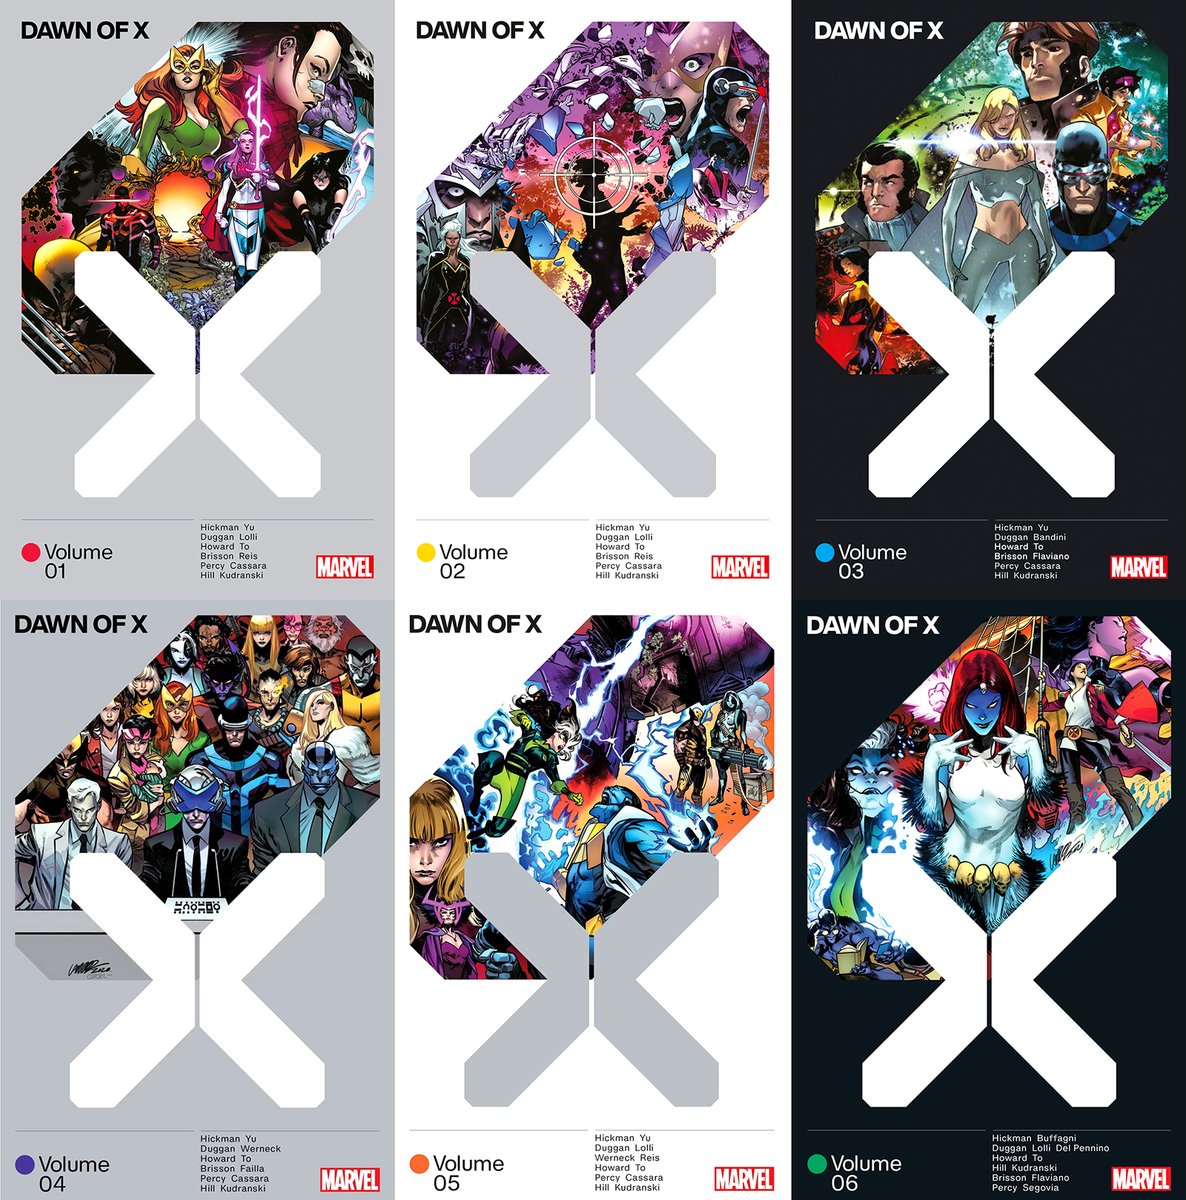 Chronological Dawn of X Covers